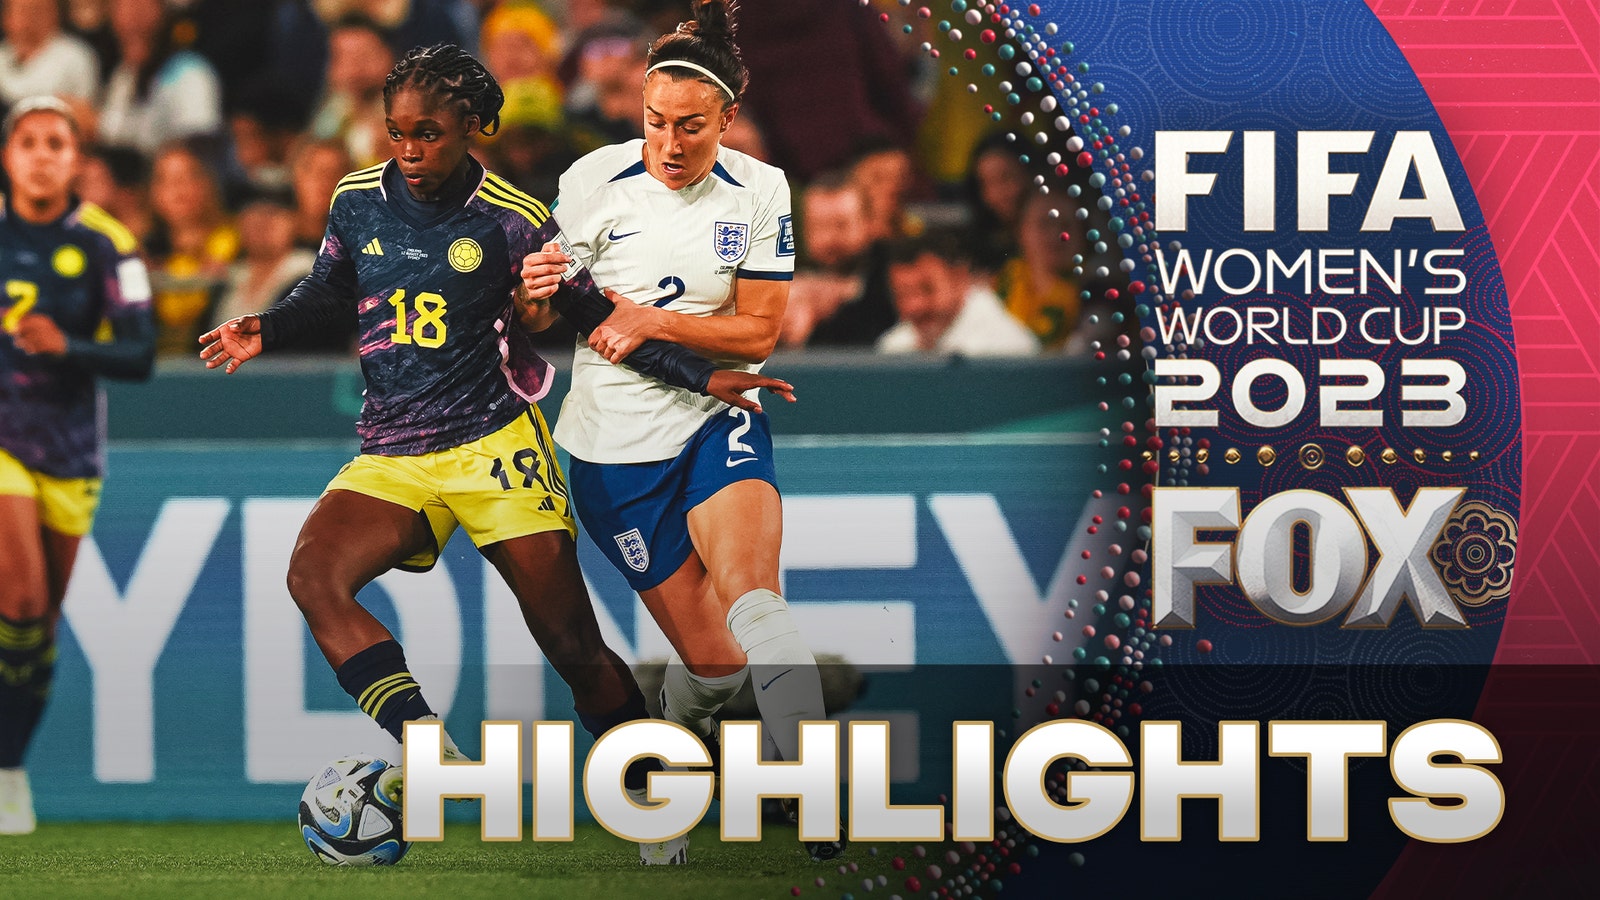 England vs. Colombia Highlights | 2023 FIFA Women's World Cup | Quarterfinals